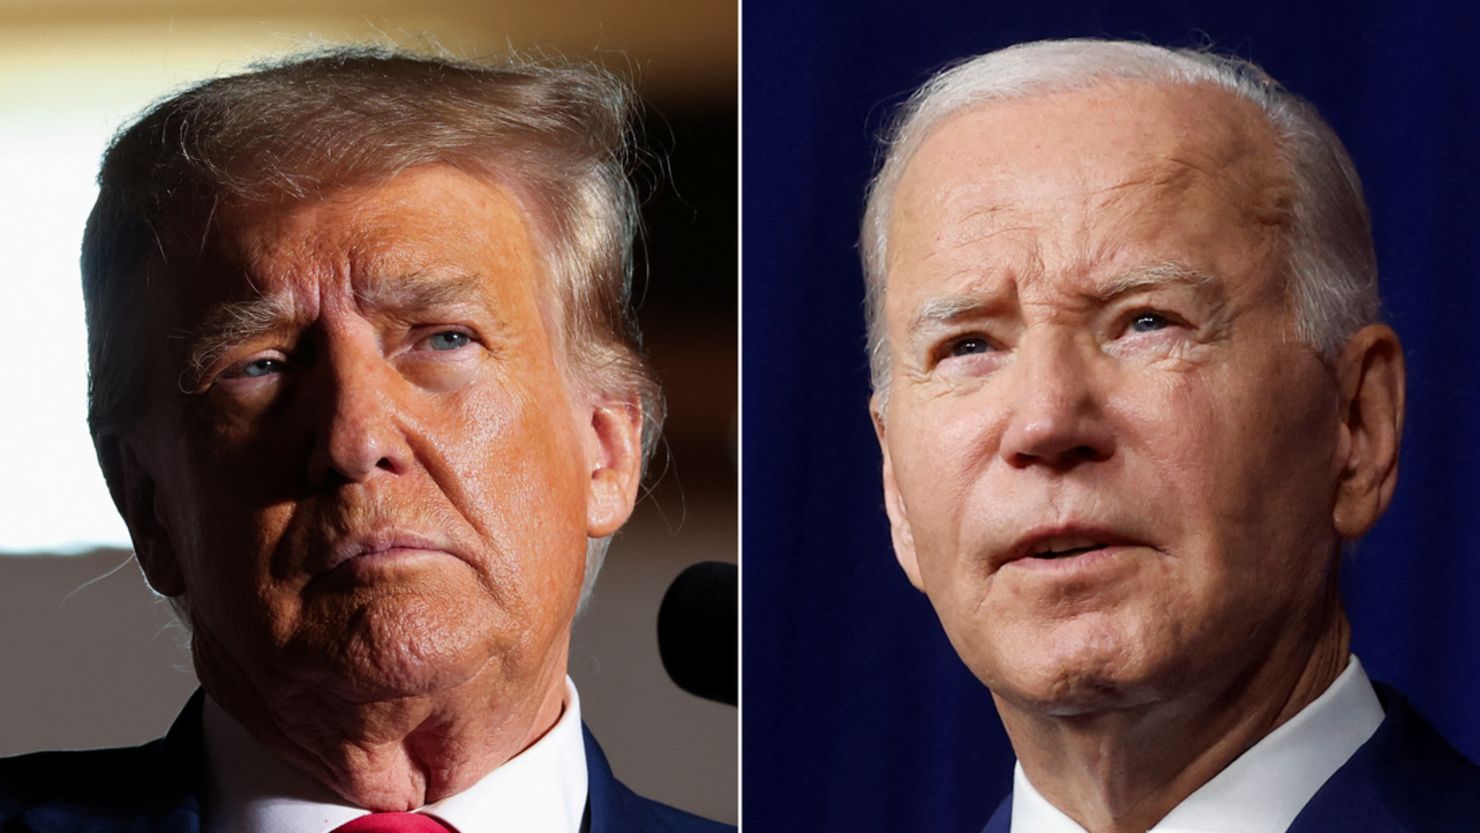 Trump and Biden's Michigan visits will present competing strategies for